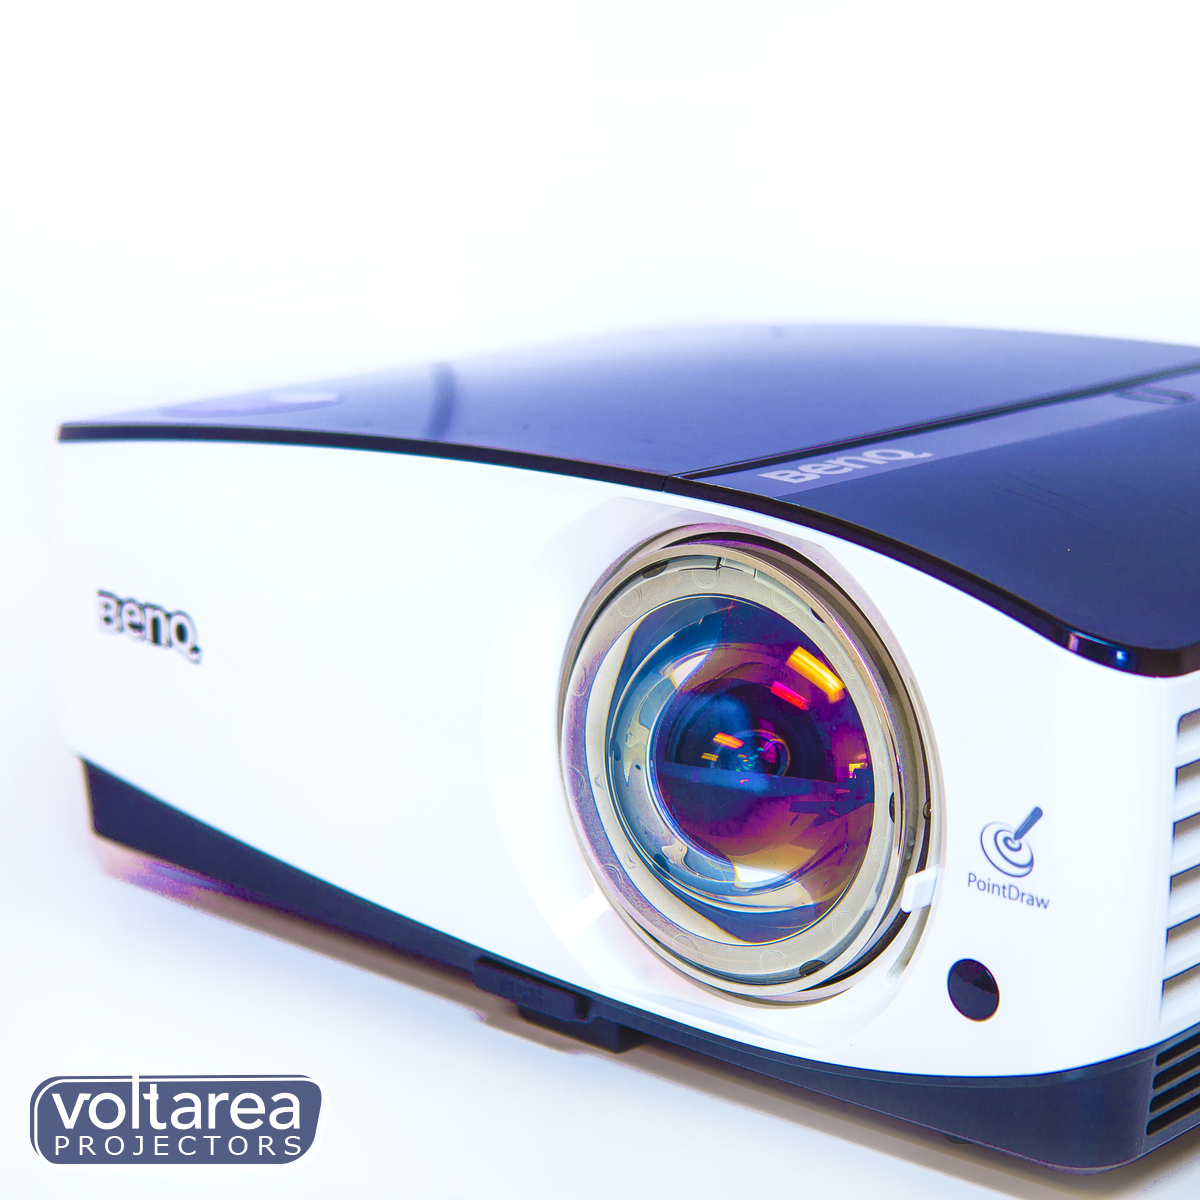 BenQ MP780ST Short-Throw Projector USED